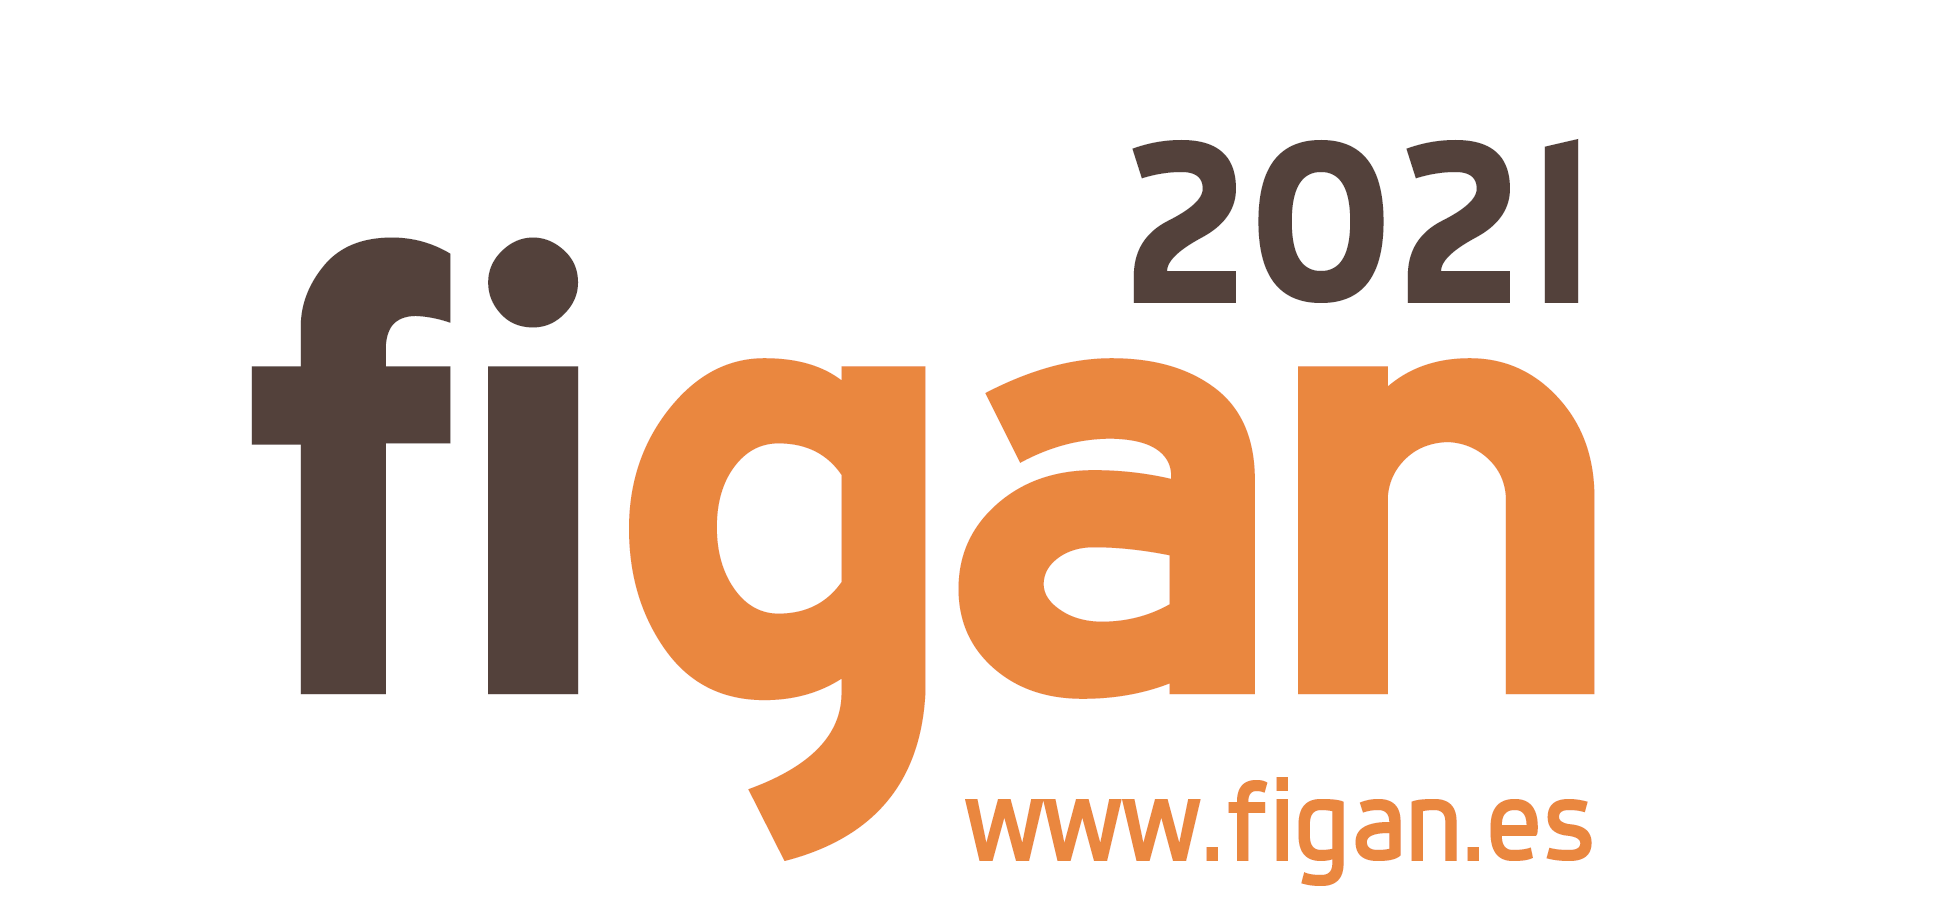 Get your entry ticket for FIGAN 2021